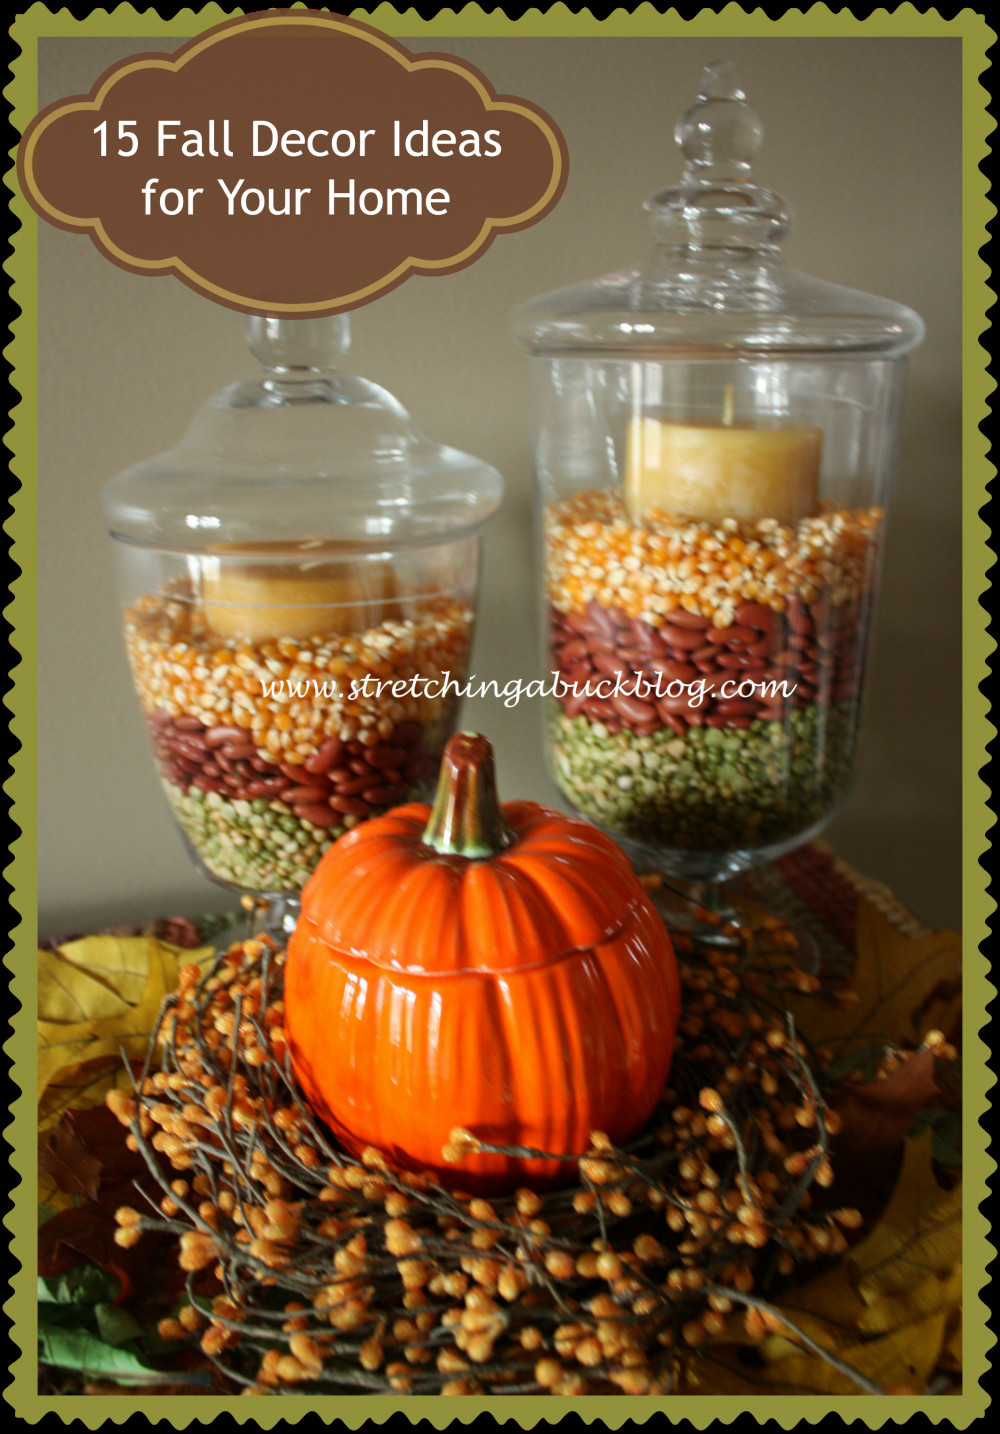 At Home Fall Decor
 15 Fall Decor Ideas for Your Home Stretching a Buck